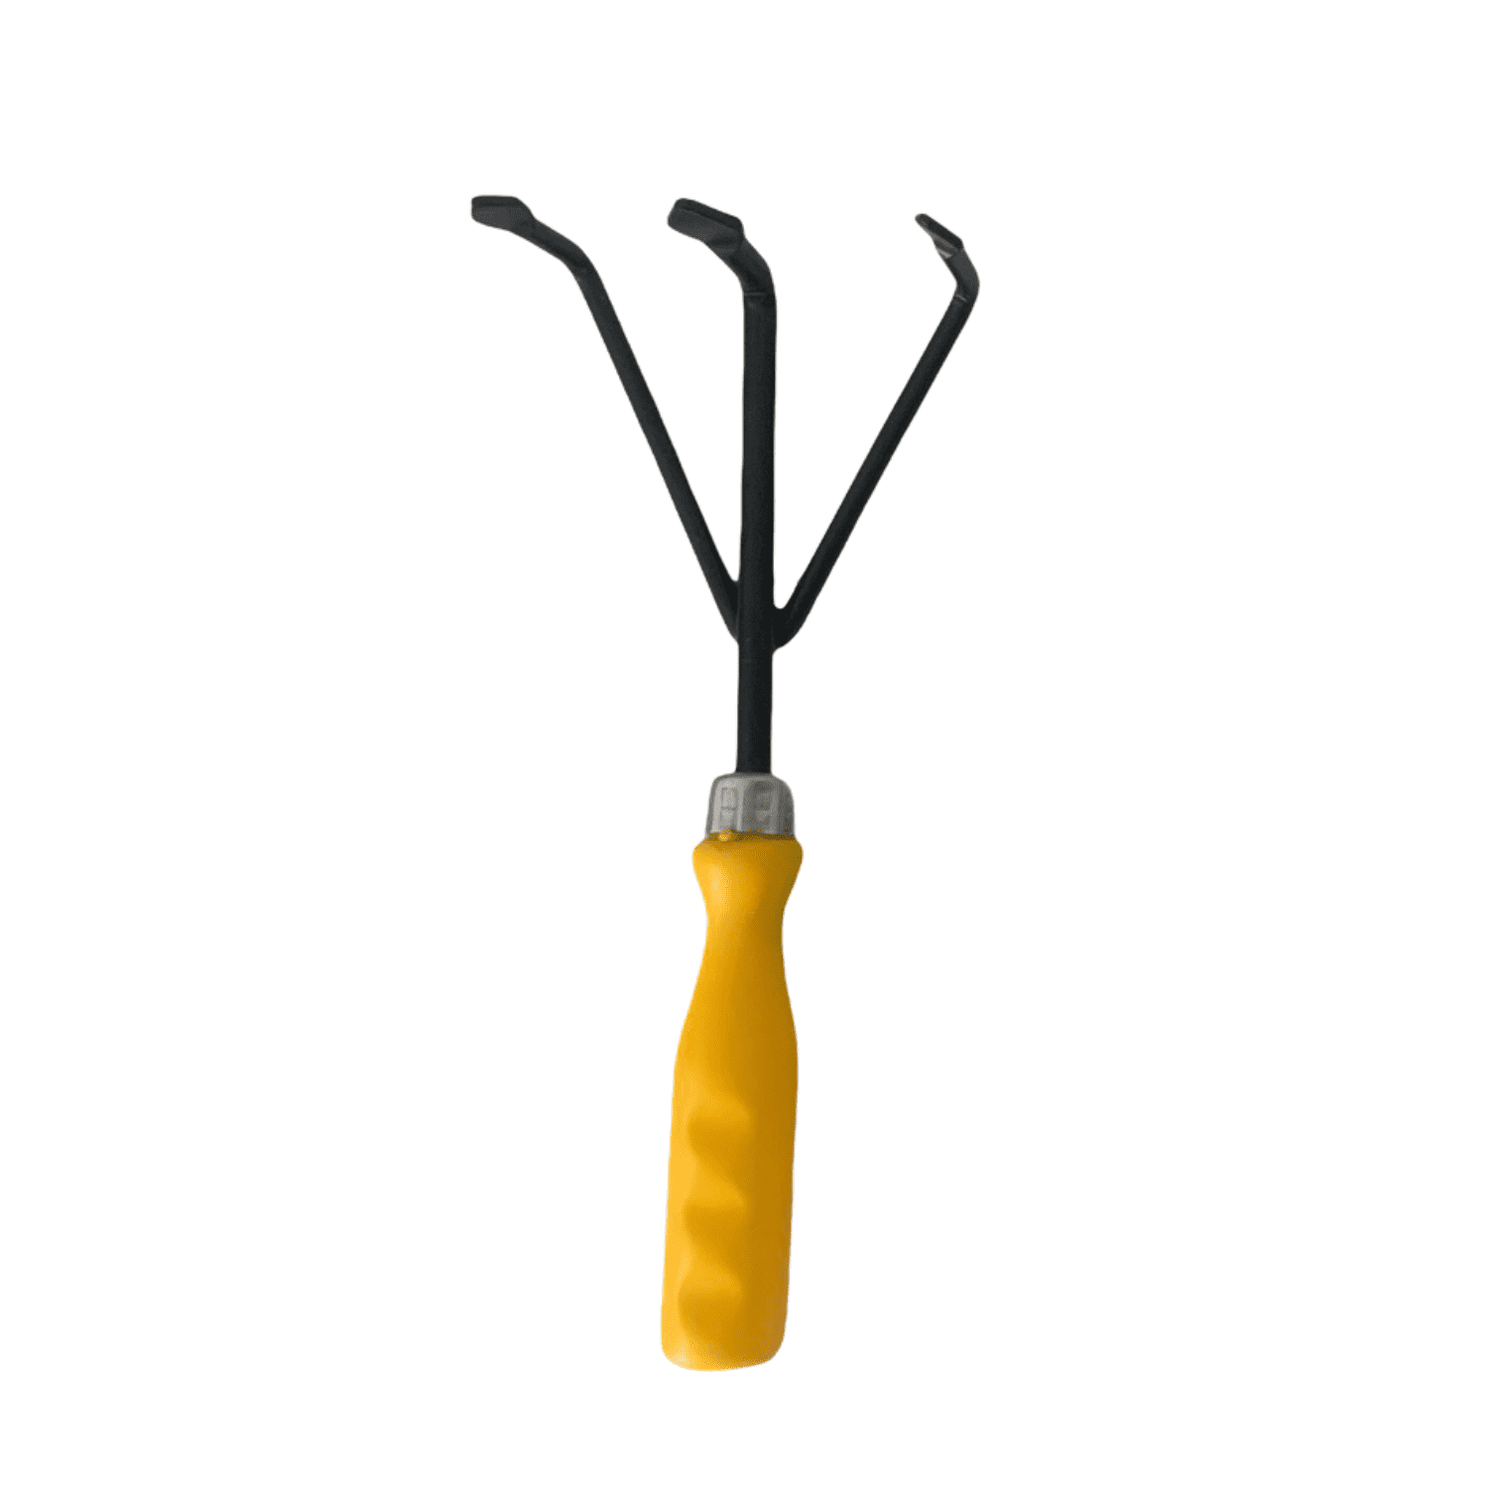 Hand Cultivator with Plastic Handle - Essential Gardening Tool